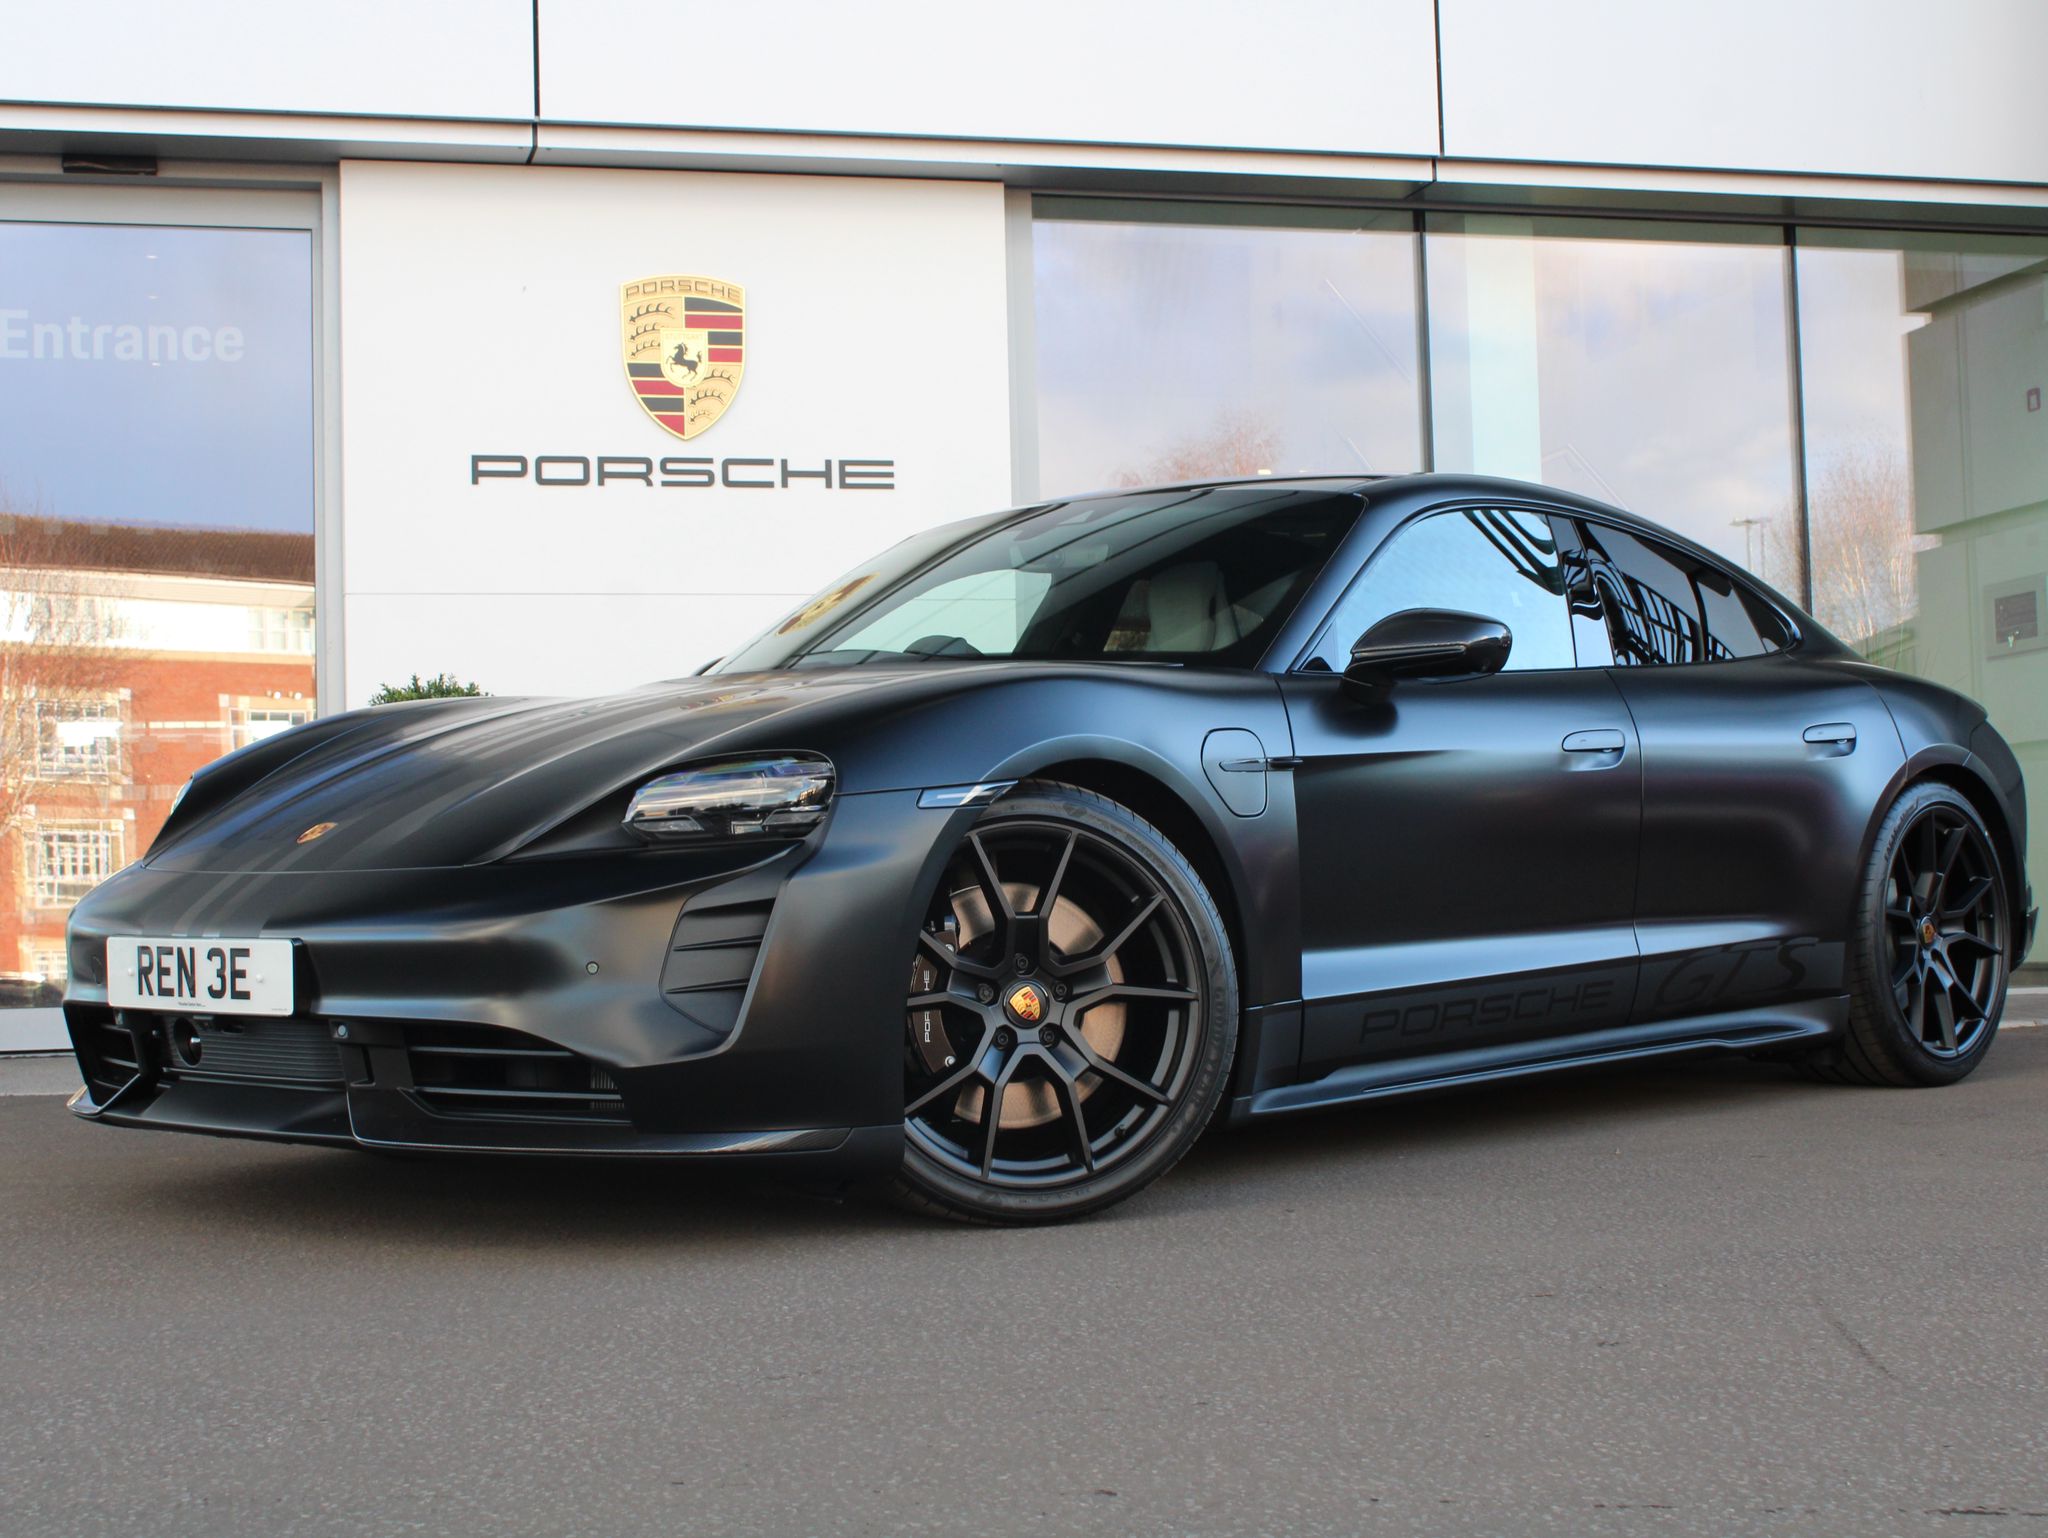 Porsche Taycan Just took delivery of my 2023 Taycan GTS and wrapped in satin PPF WhatsApp Image 2023-03-08 at 13.47.15